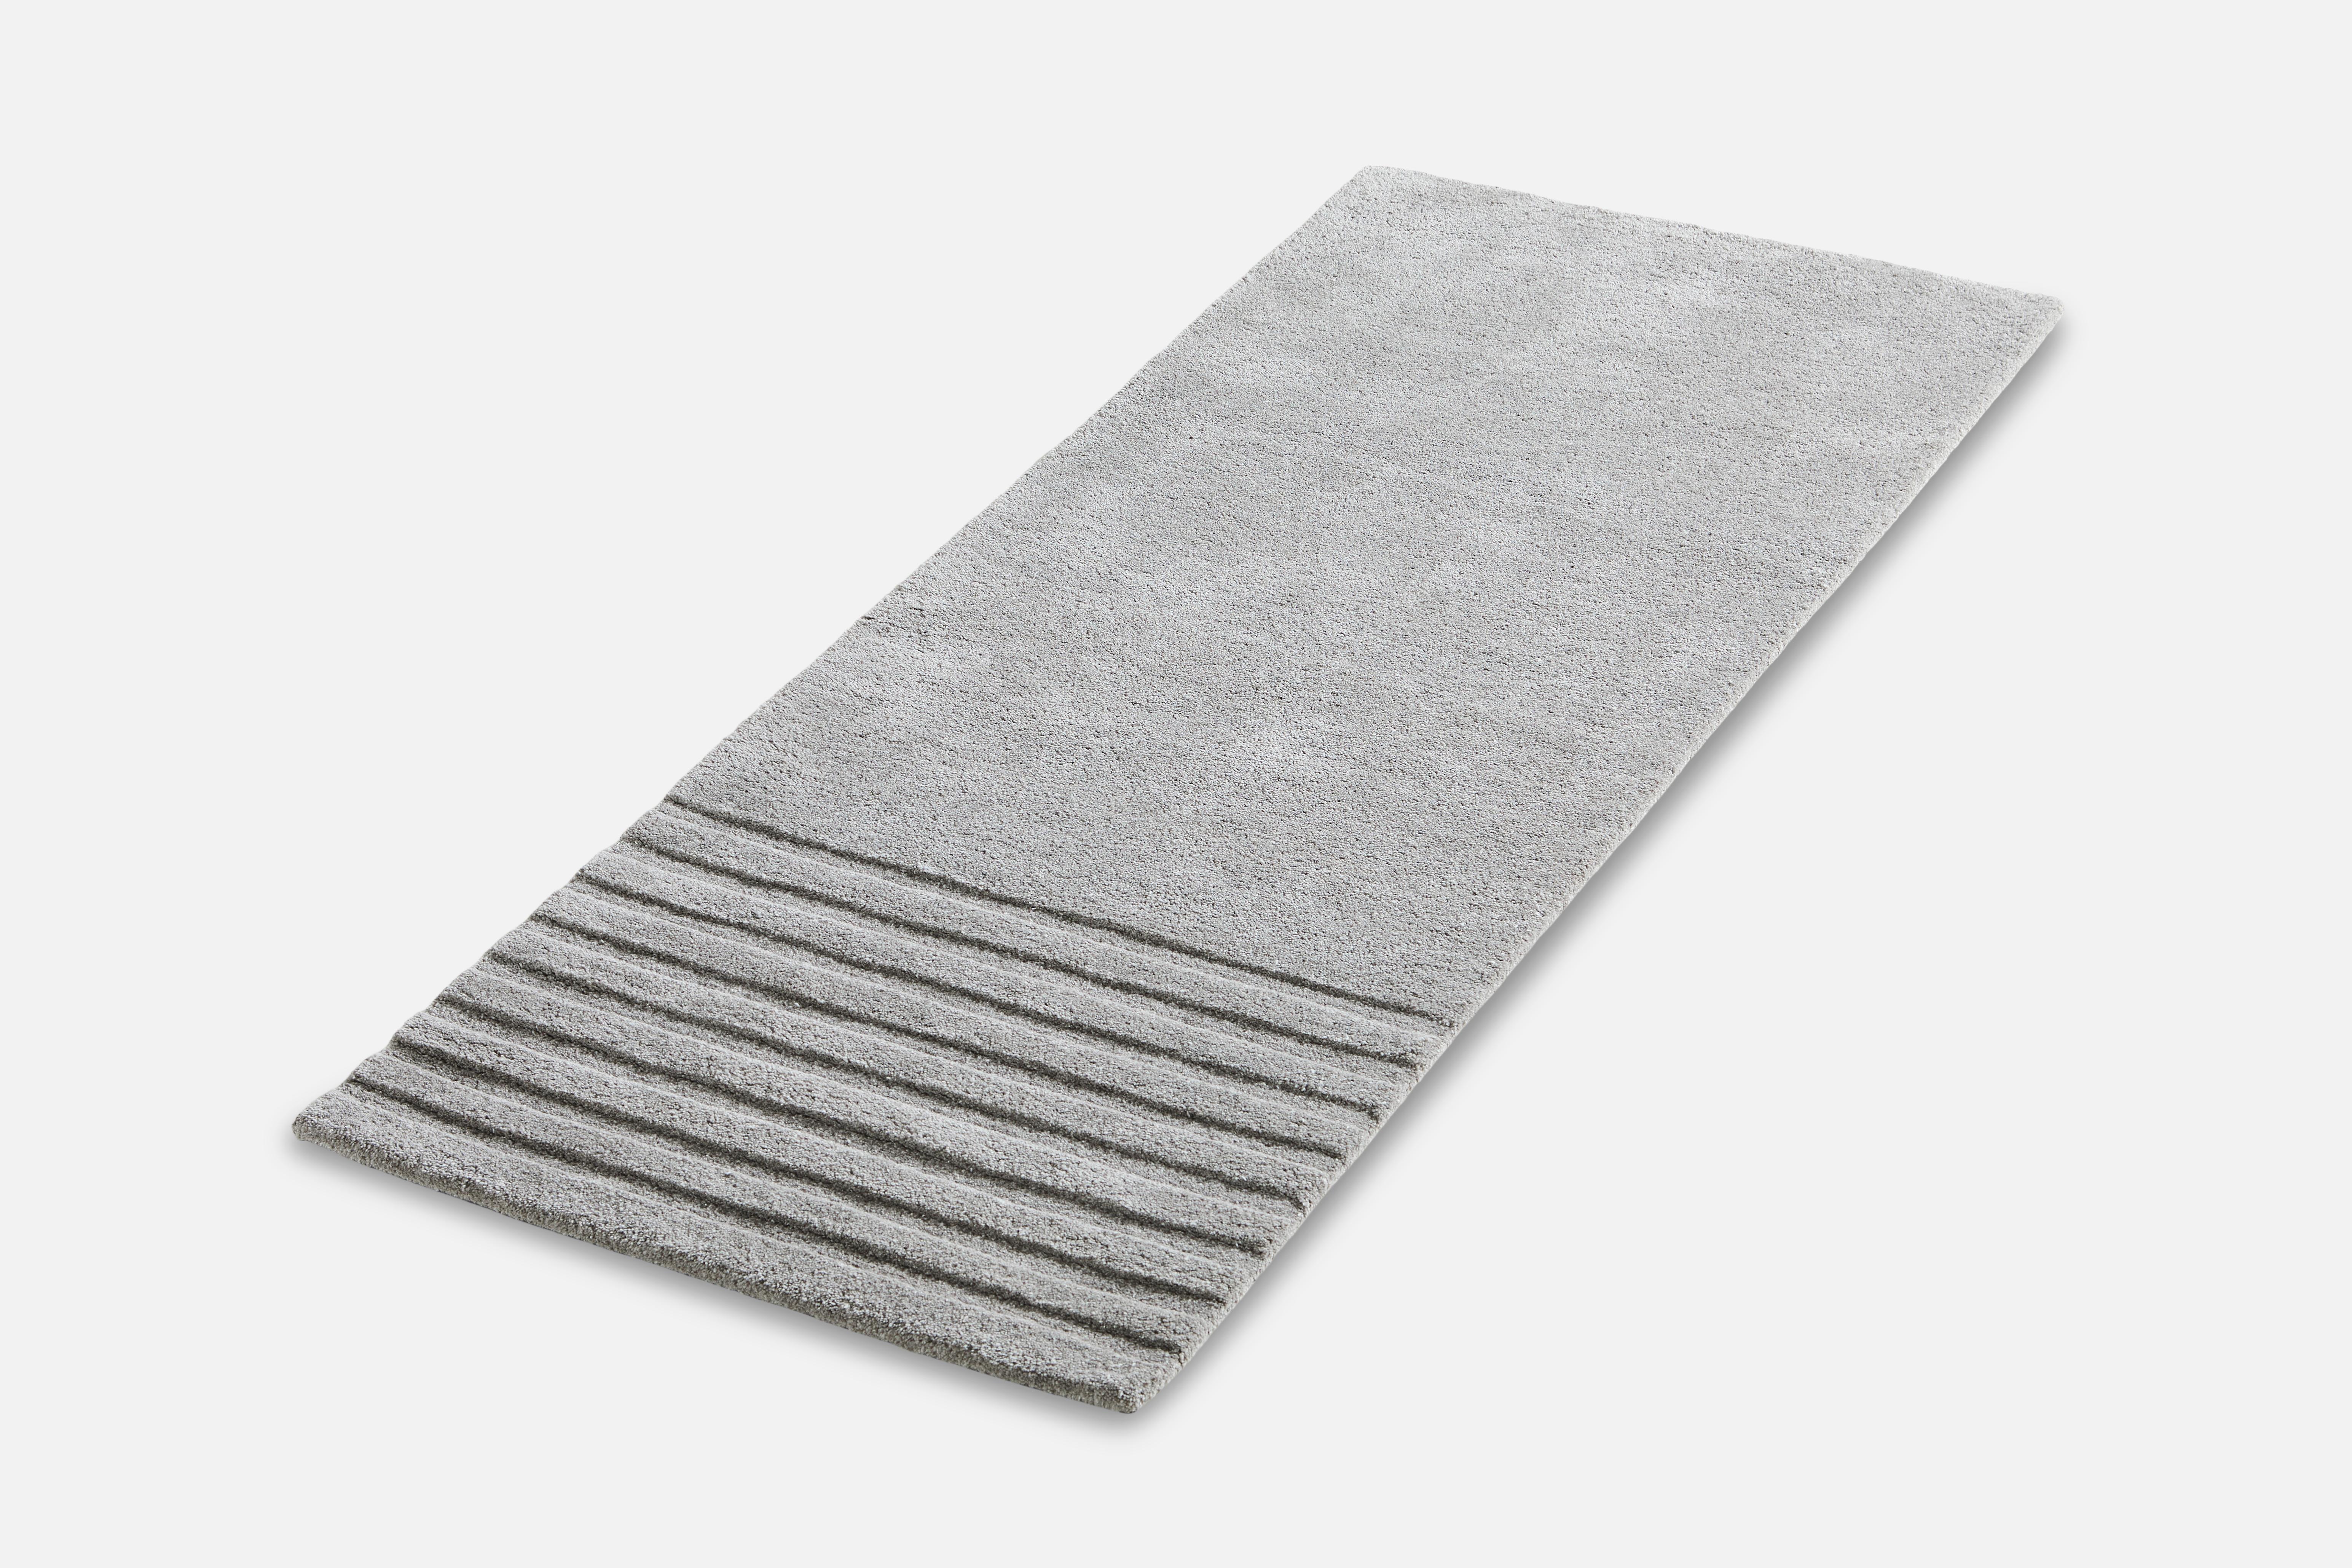 Grey Kyoto rug II by AD Miller.
Materials: 80% wool, 20% cotton.
Dimensions: W 200 x L 80 cm
Available in grey or off white.

The hand-tufted wool rug, Kyoto, takes its inspiration from the distinctive pattern found in traditional raked